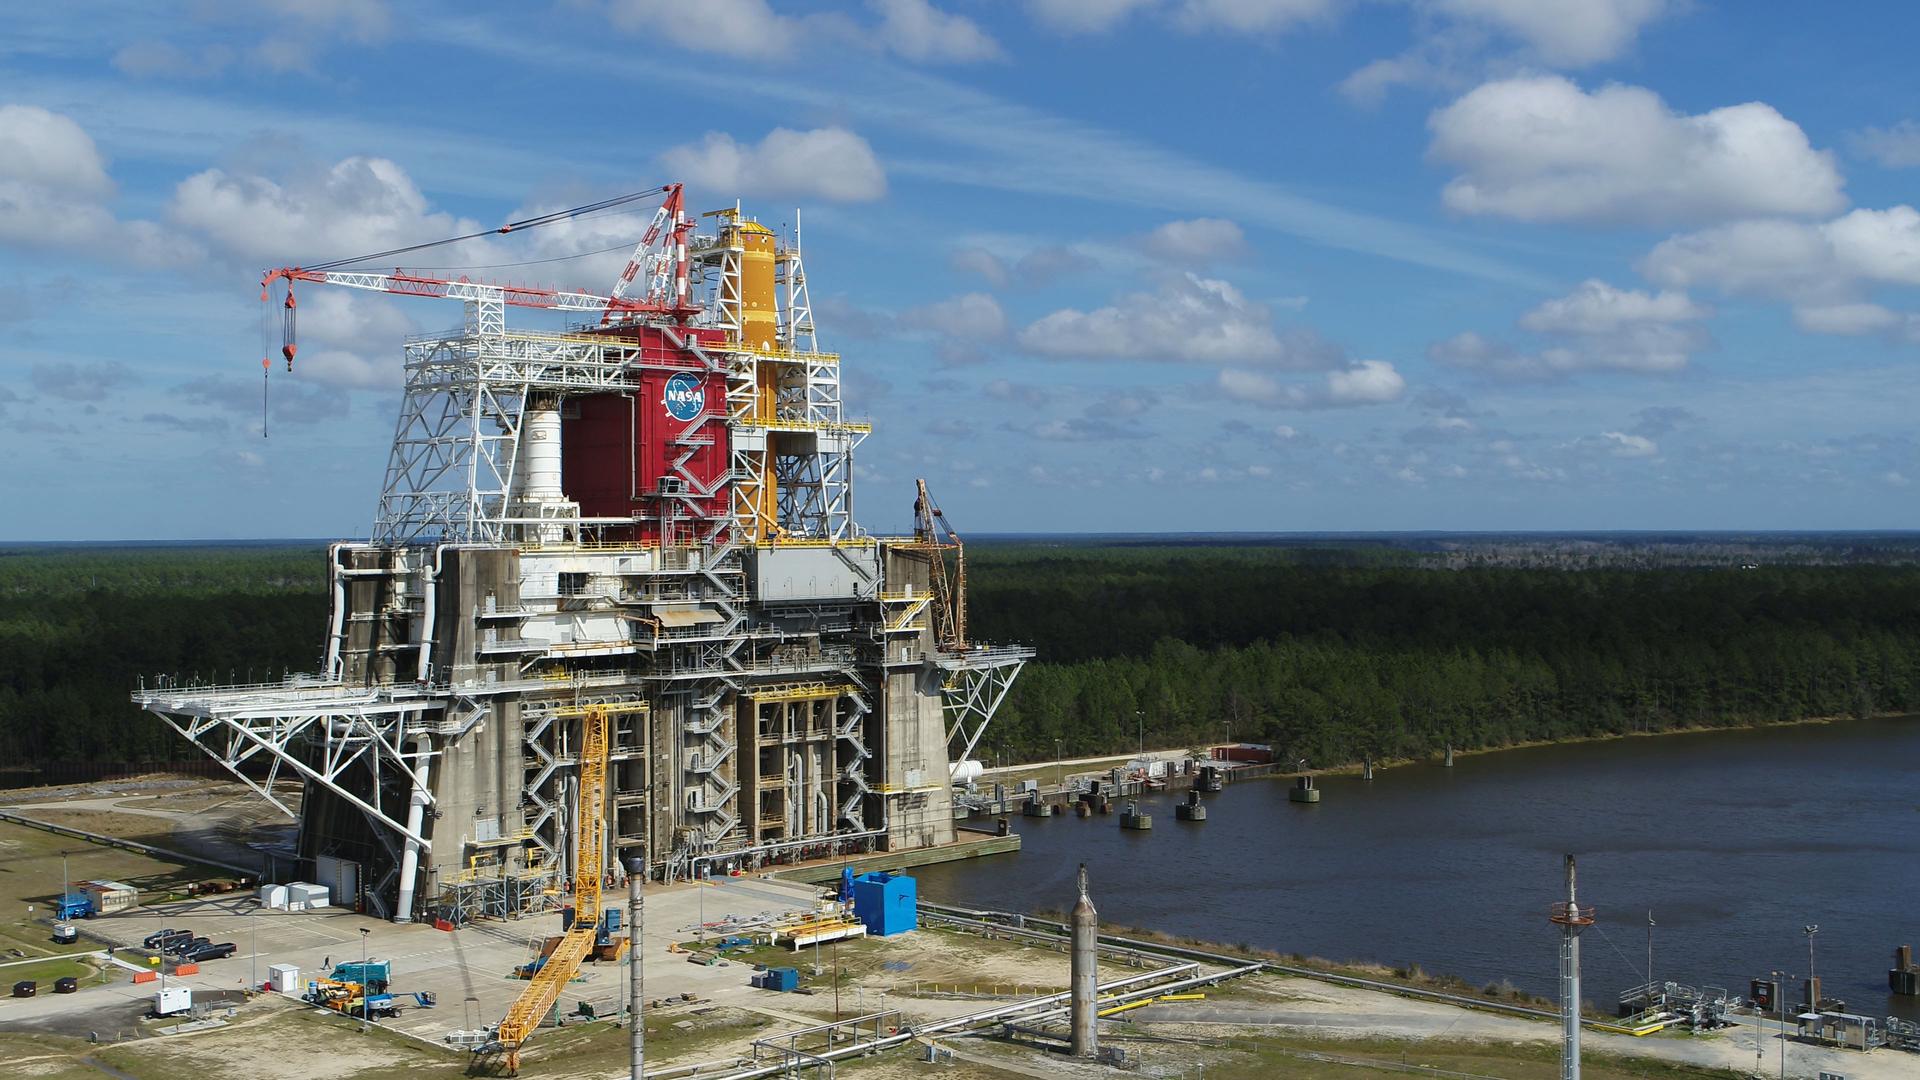 A NASA drone photo offers a bird’s-eye view of the B-2 Test Stand at NASA’s Stennis Space Center